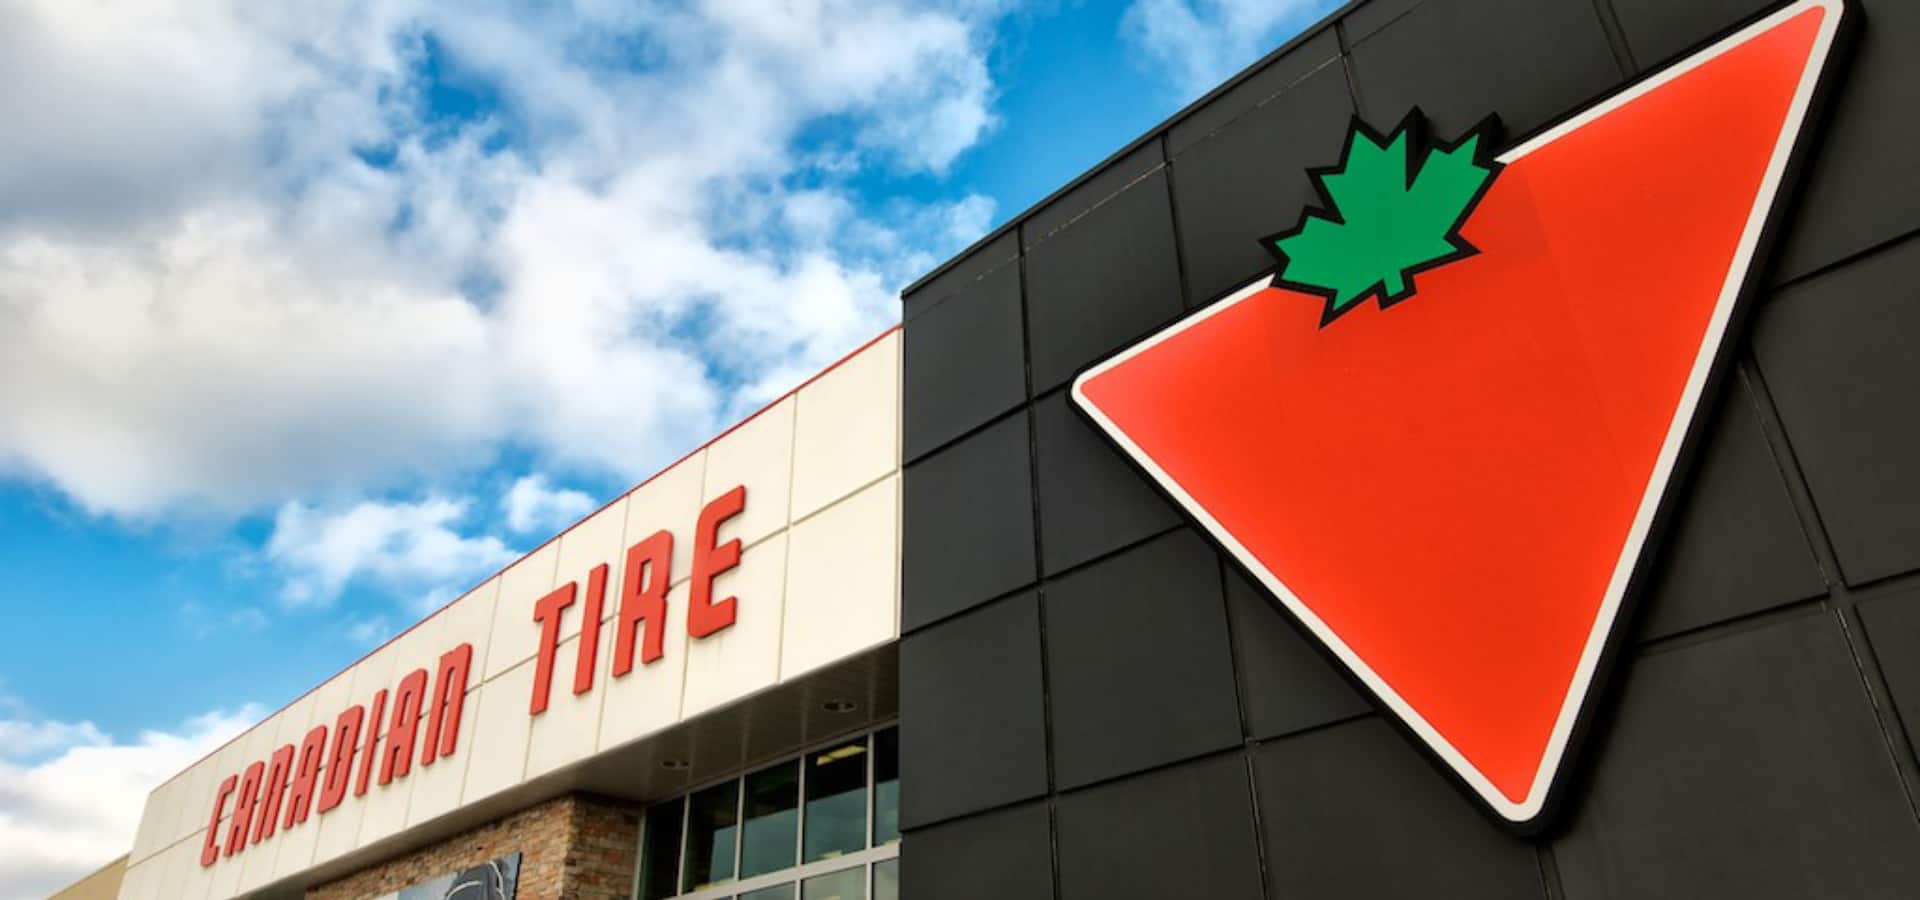 Exterior of a Canadian Tire store against a cloudy blue sky.